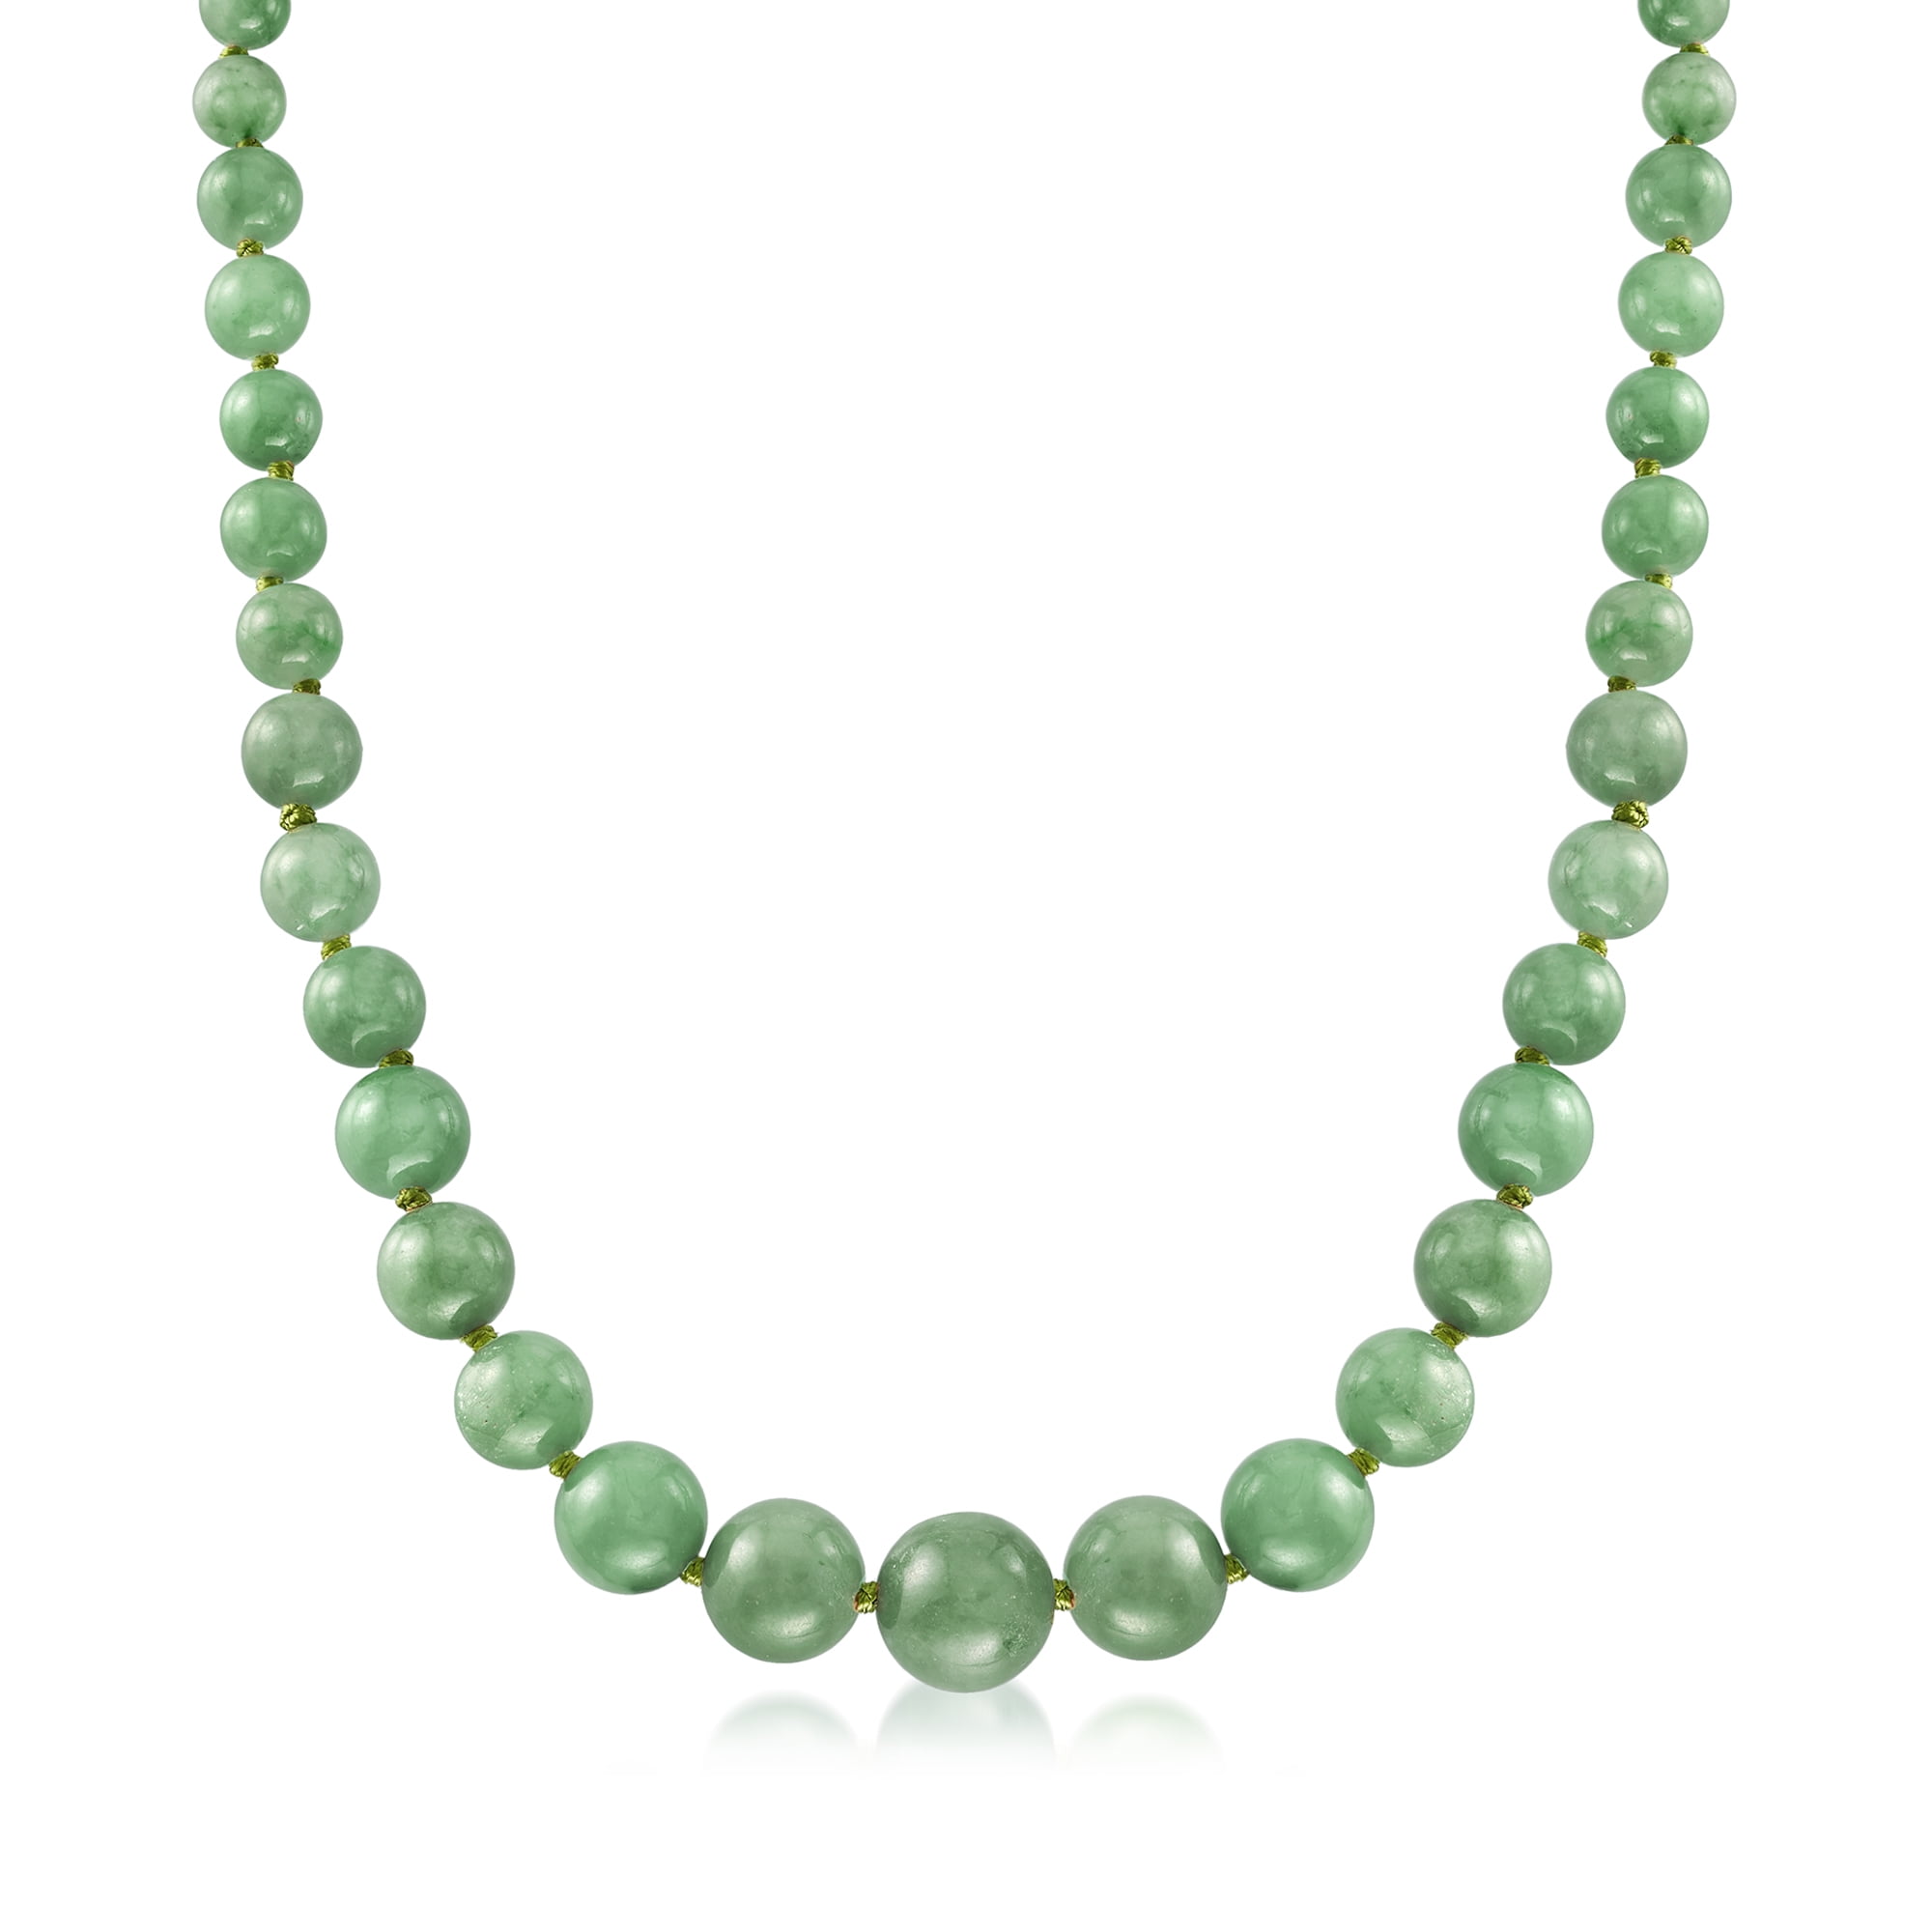 Vintage multi strand nature Chinese green Jade beautiful design necklace 18"+2" 